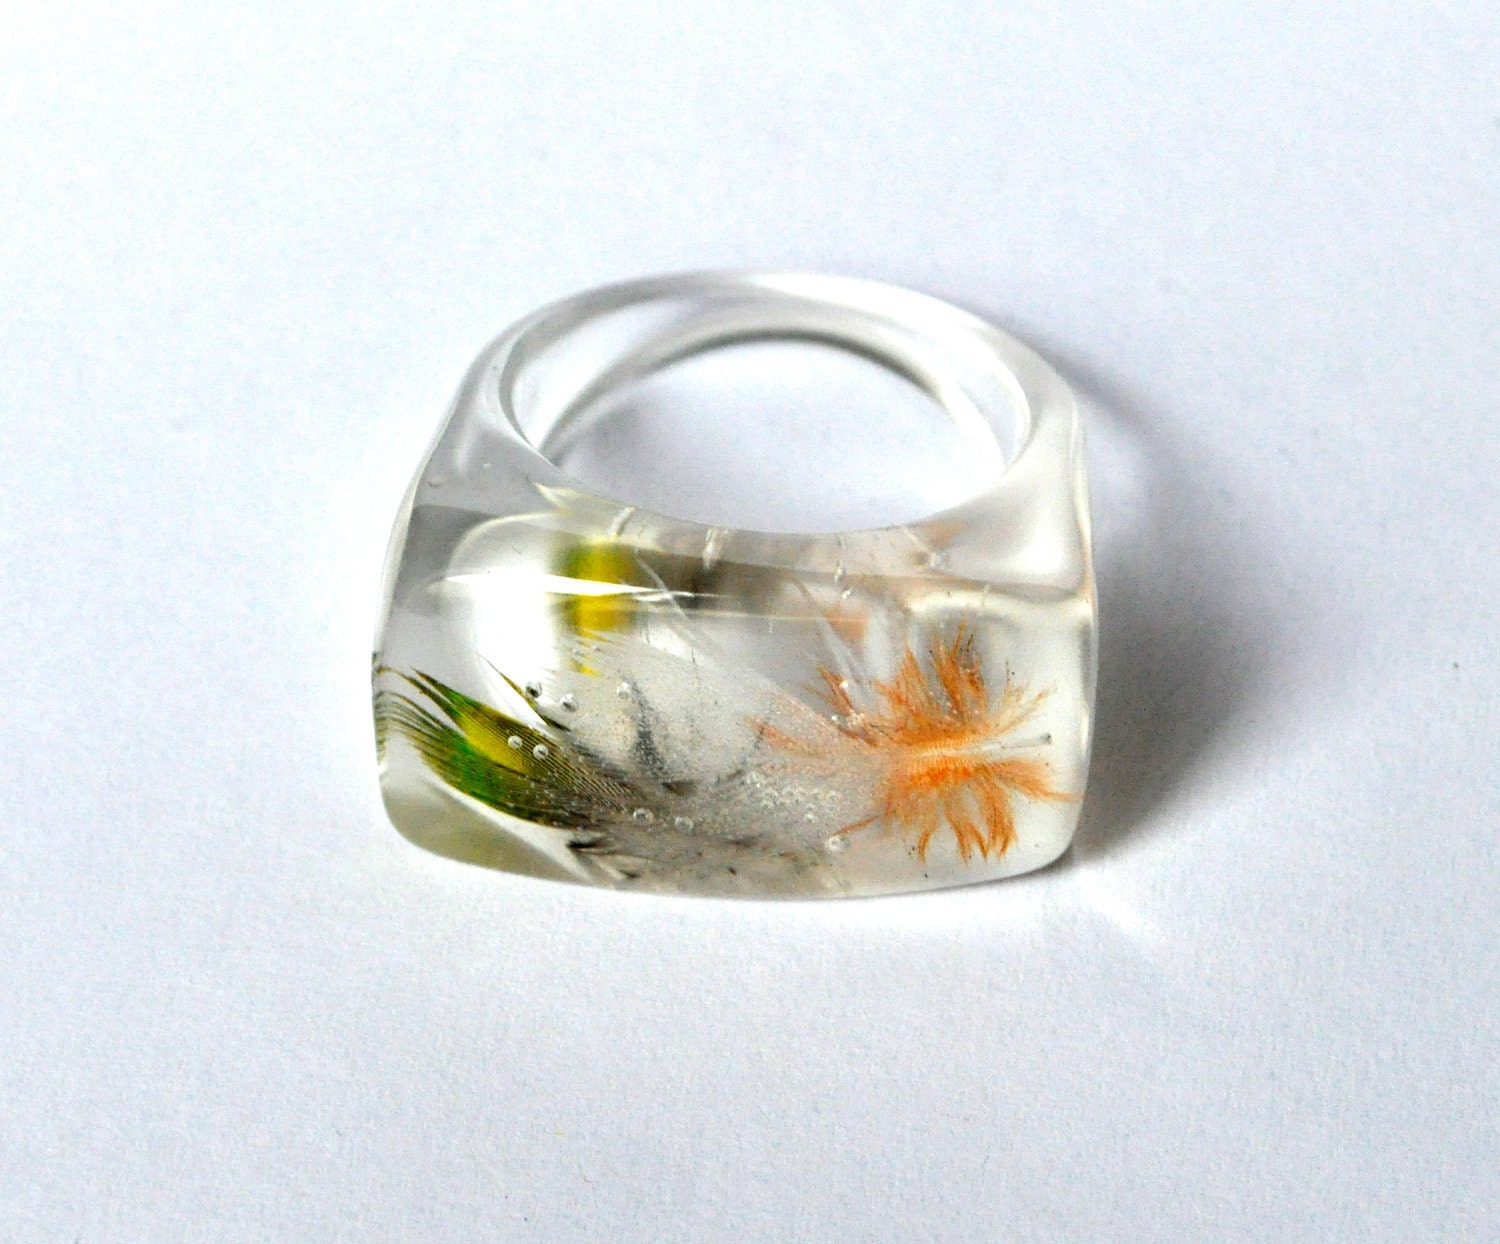 Parrot Feather Resin Ring. Resin Jewelry. Limited Edition. Orange White Green. Size 6 1/2 USA 17 mm.